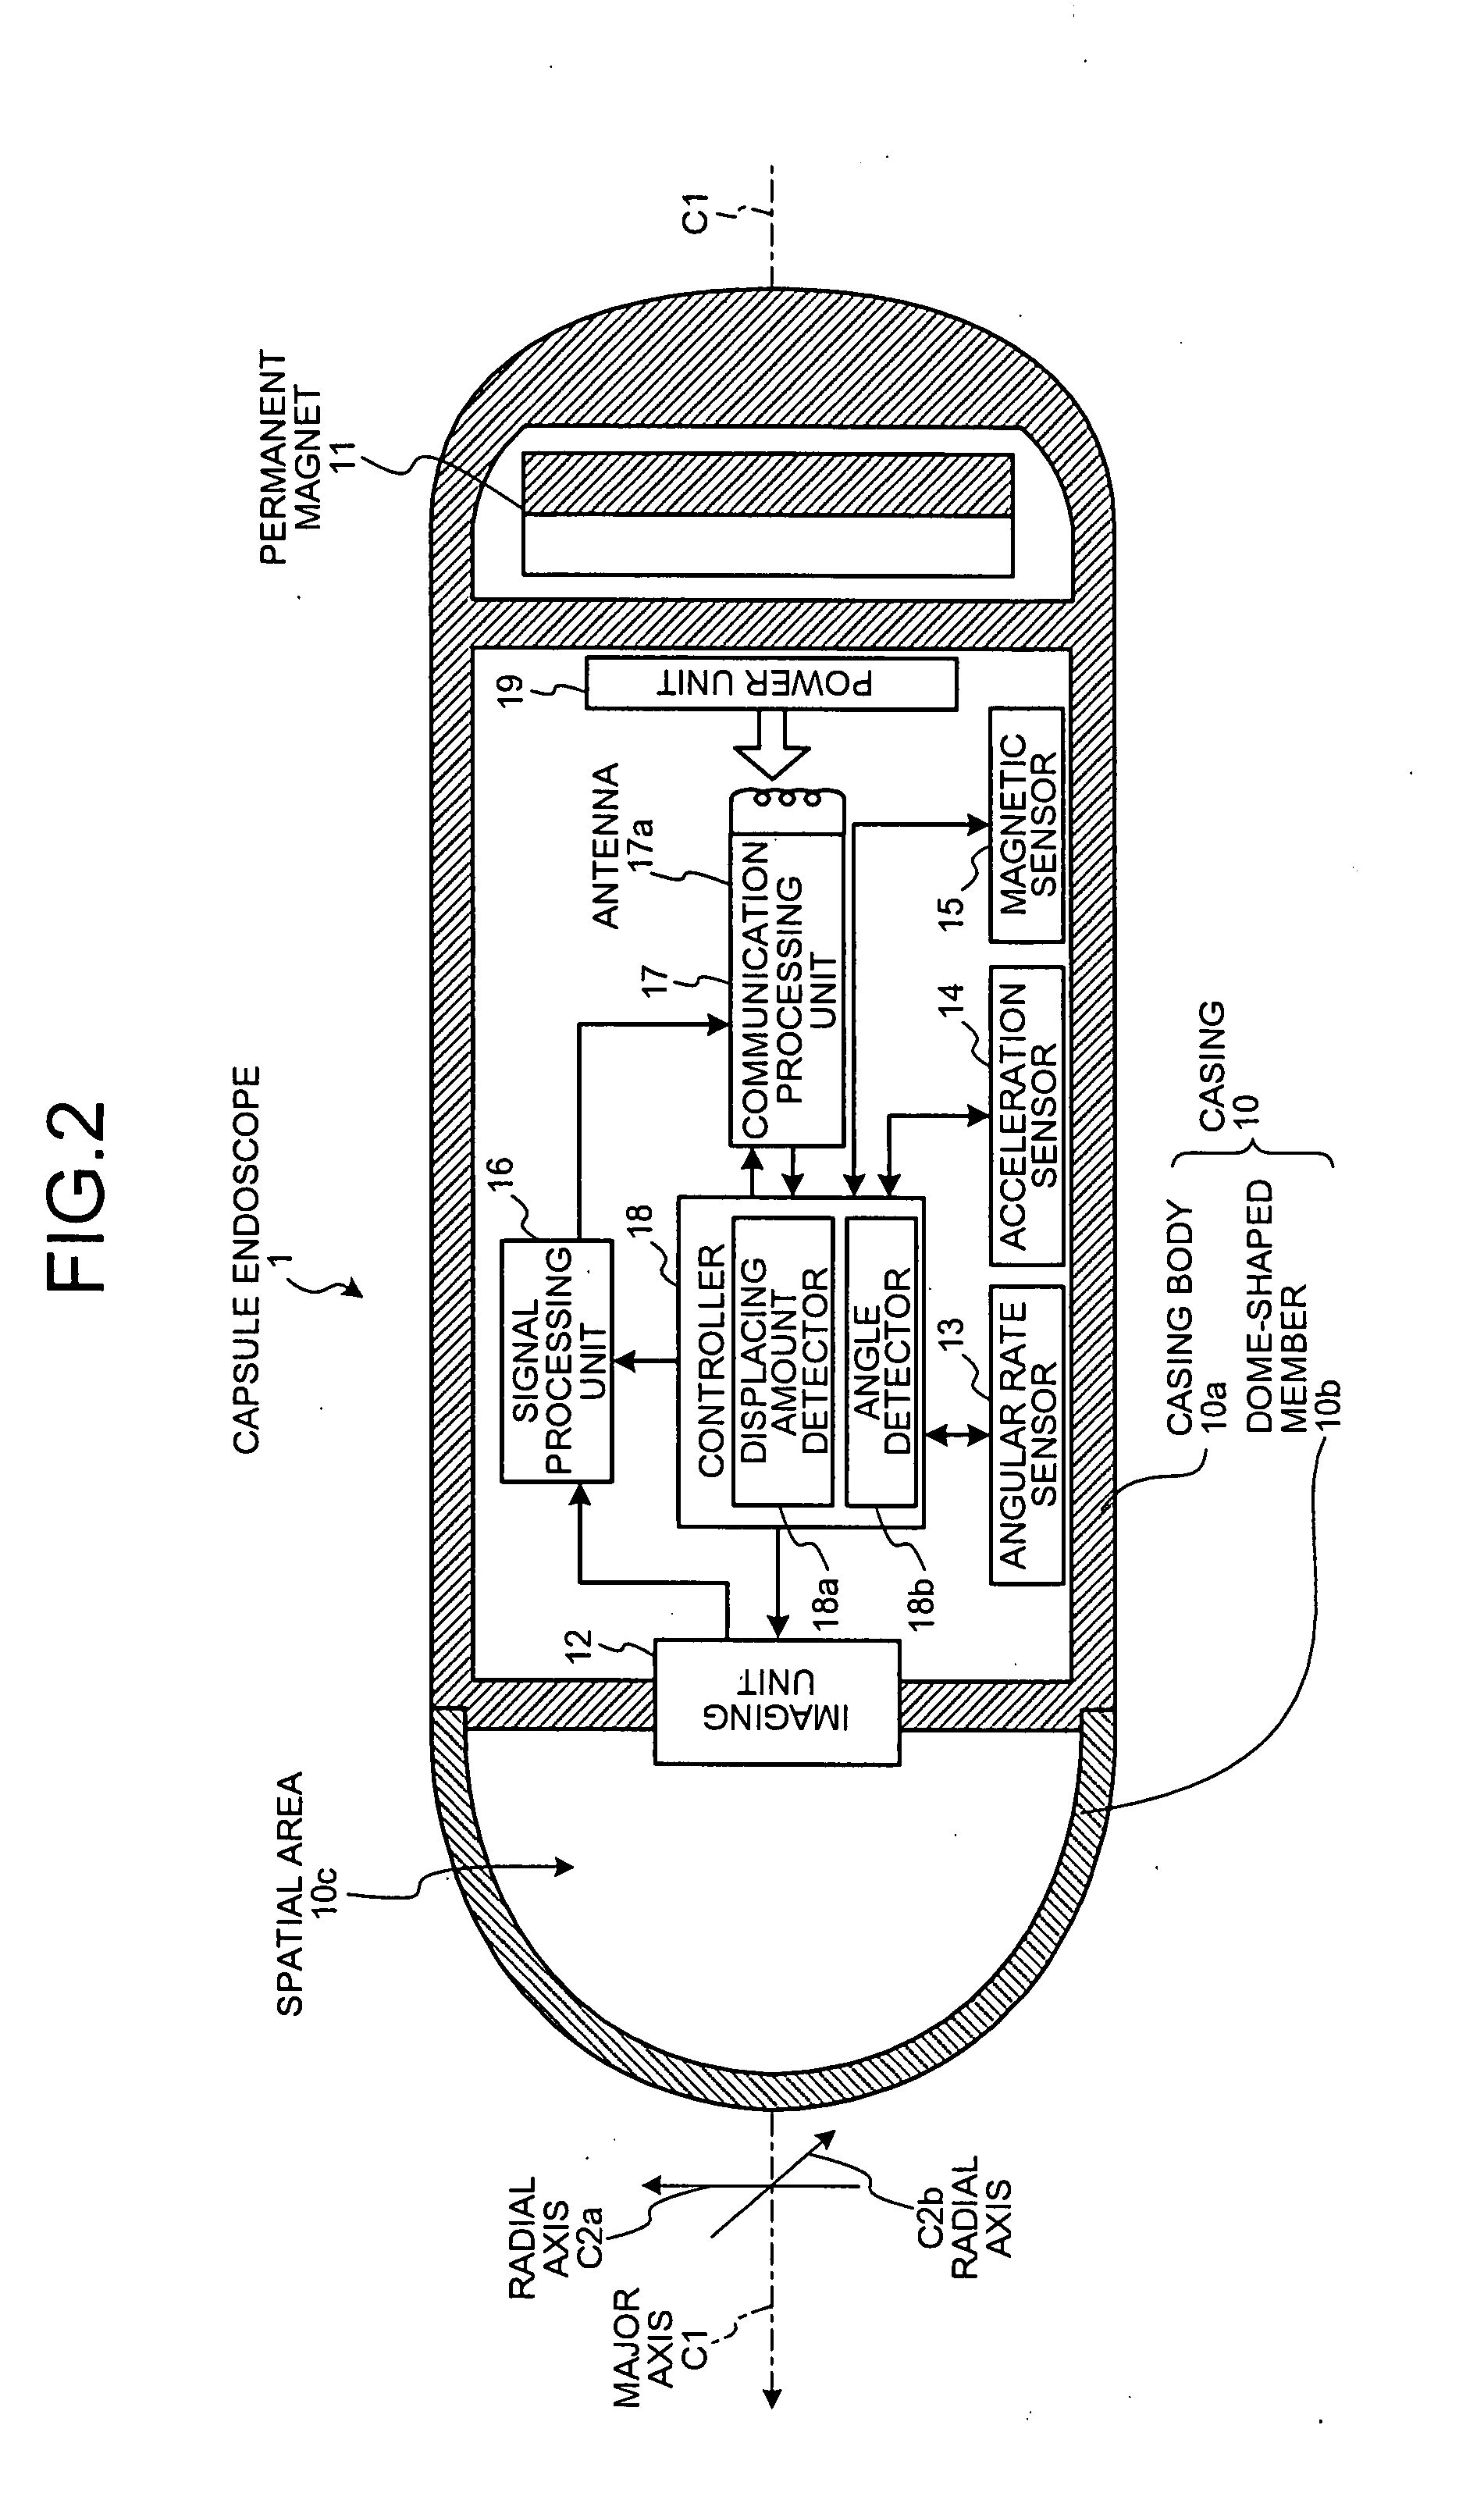 Body-insertable device system and in-vivo observation method